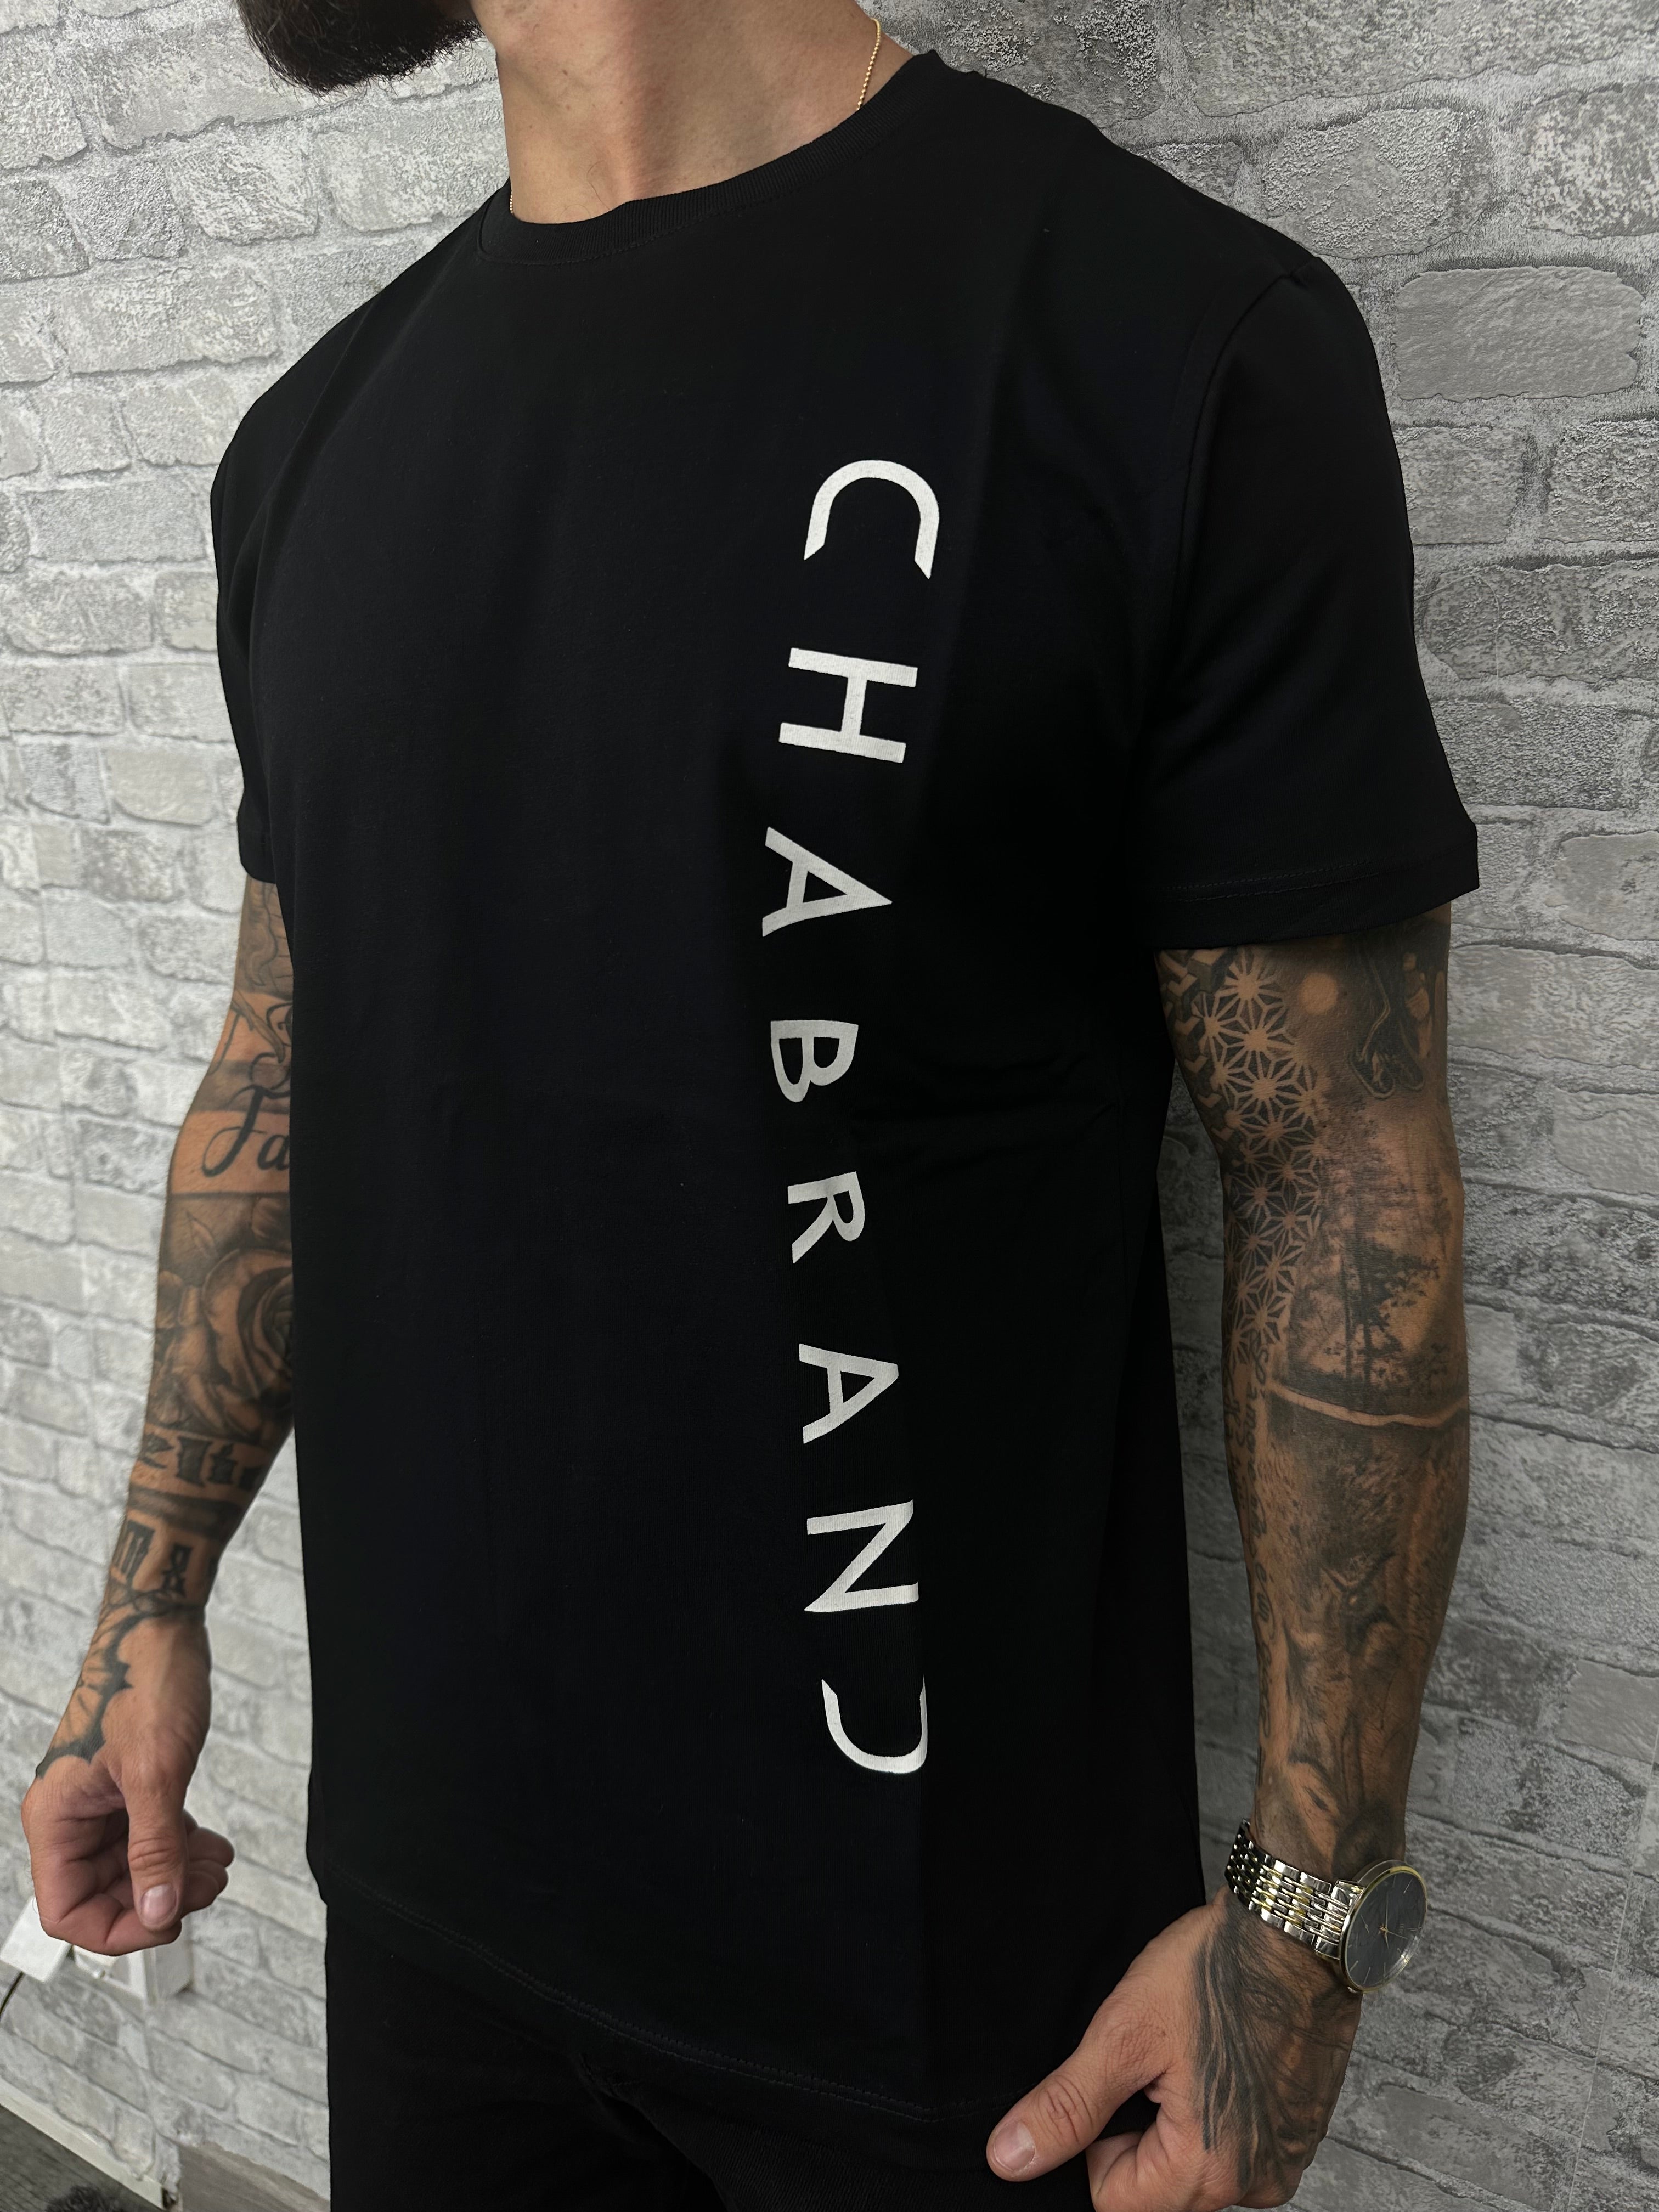 CHABRAND - Black t-shirt with white sign